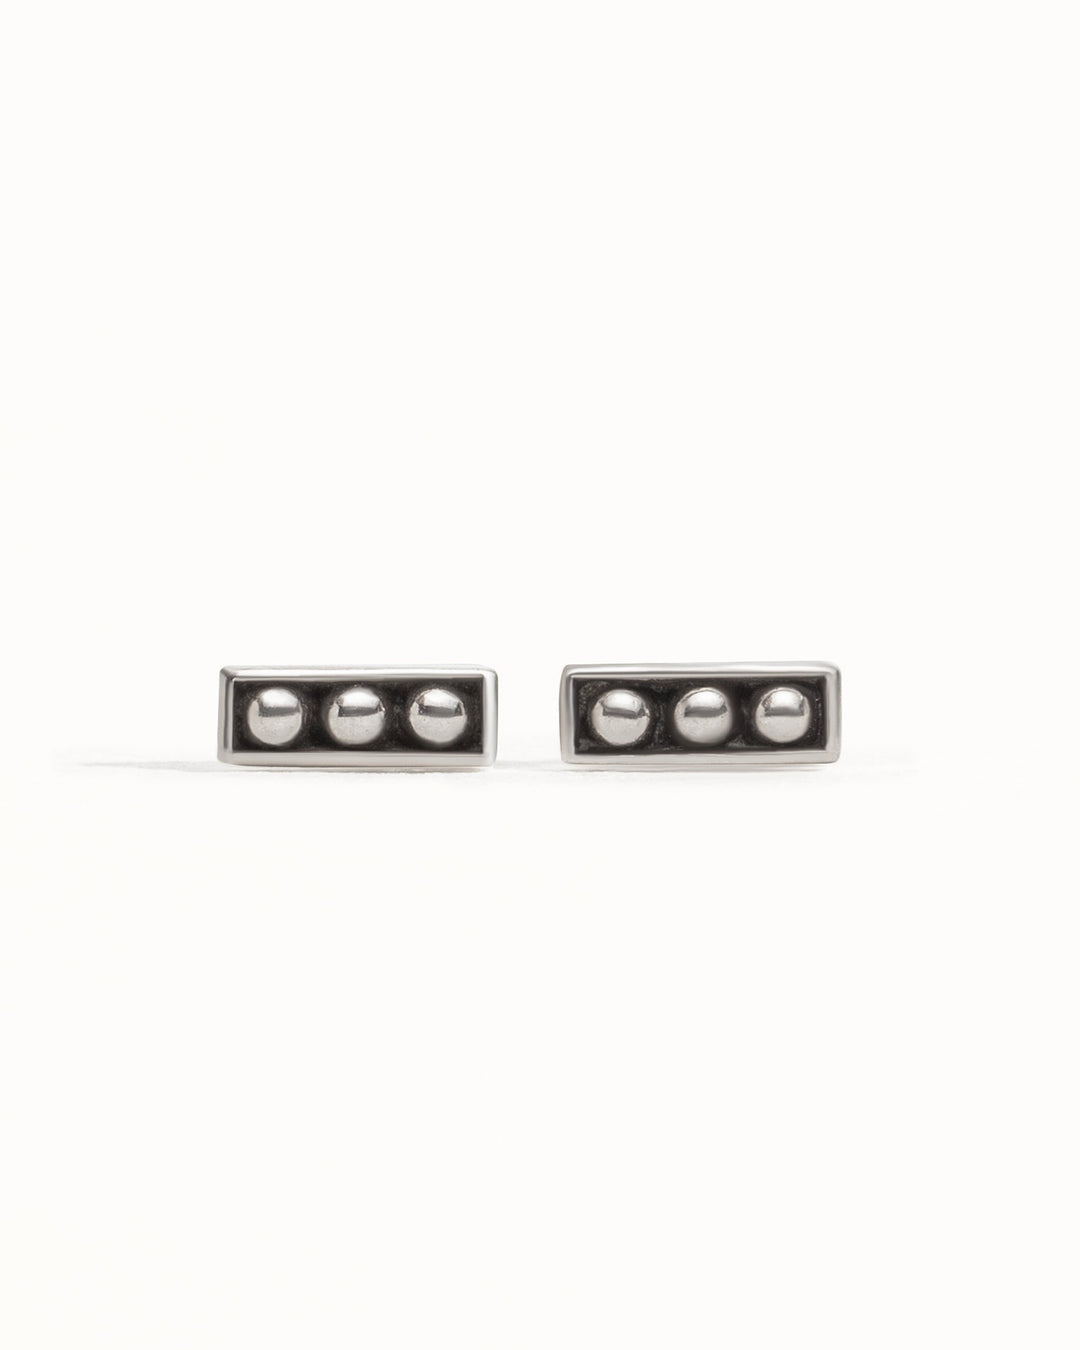 Silver Stud Earrings Sterling Silver Square Earrings Bohemian Jewelry  Gift for Her - CST003